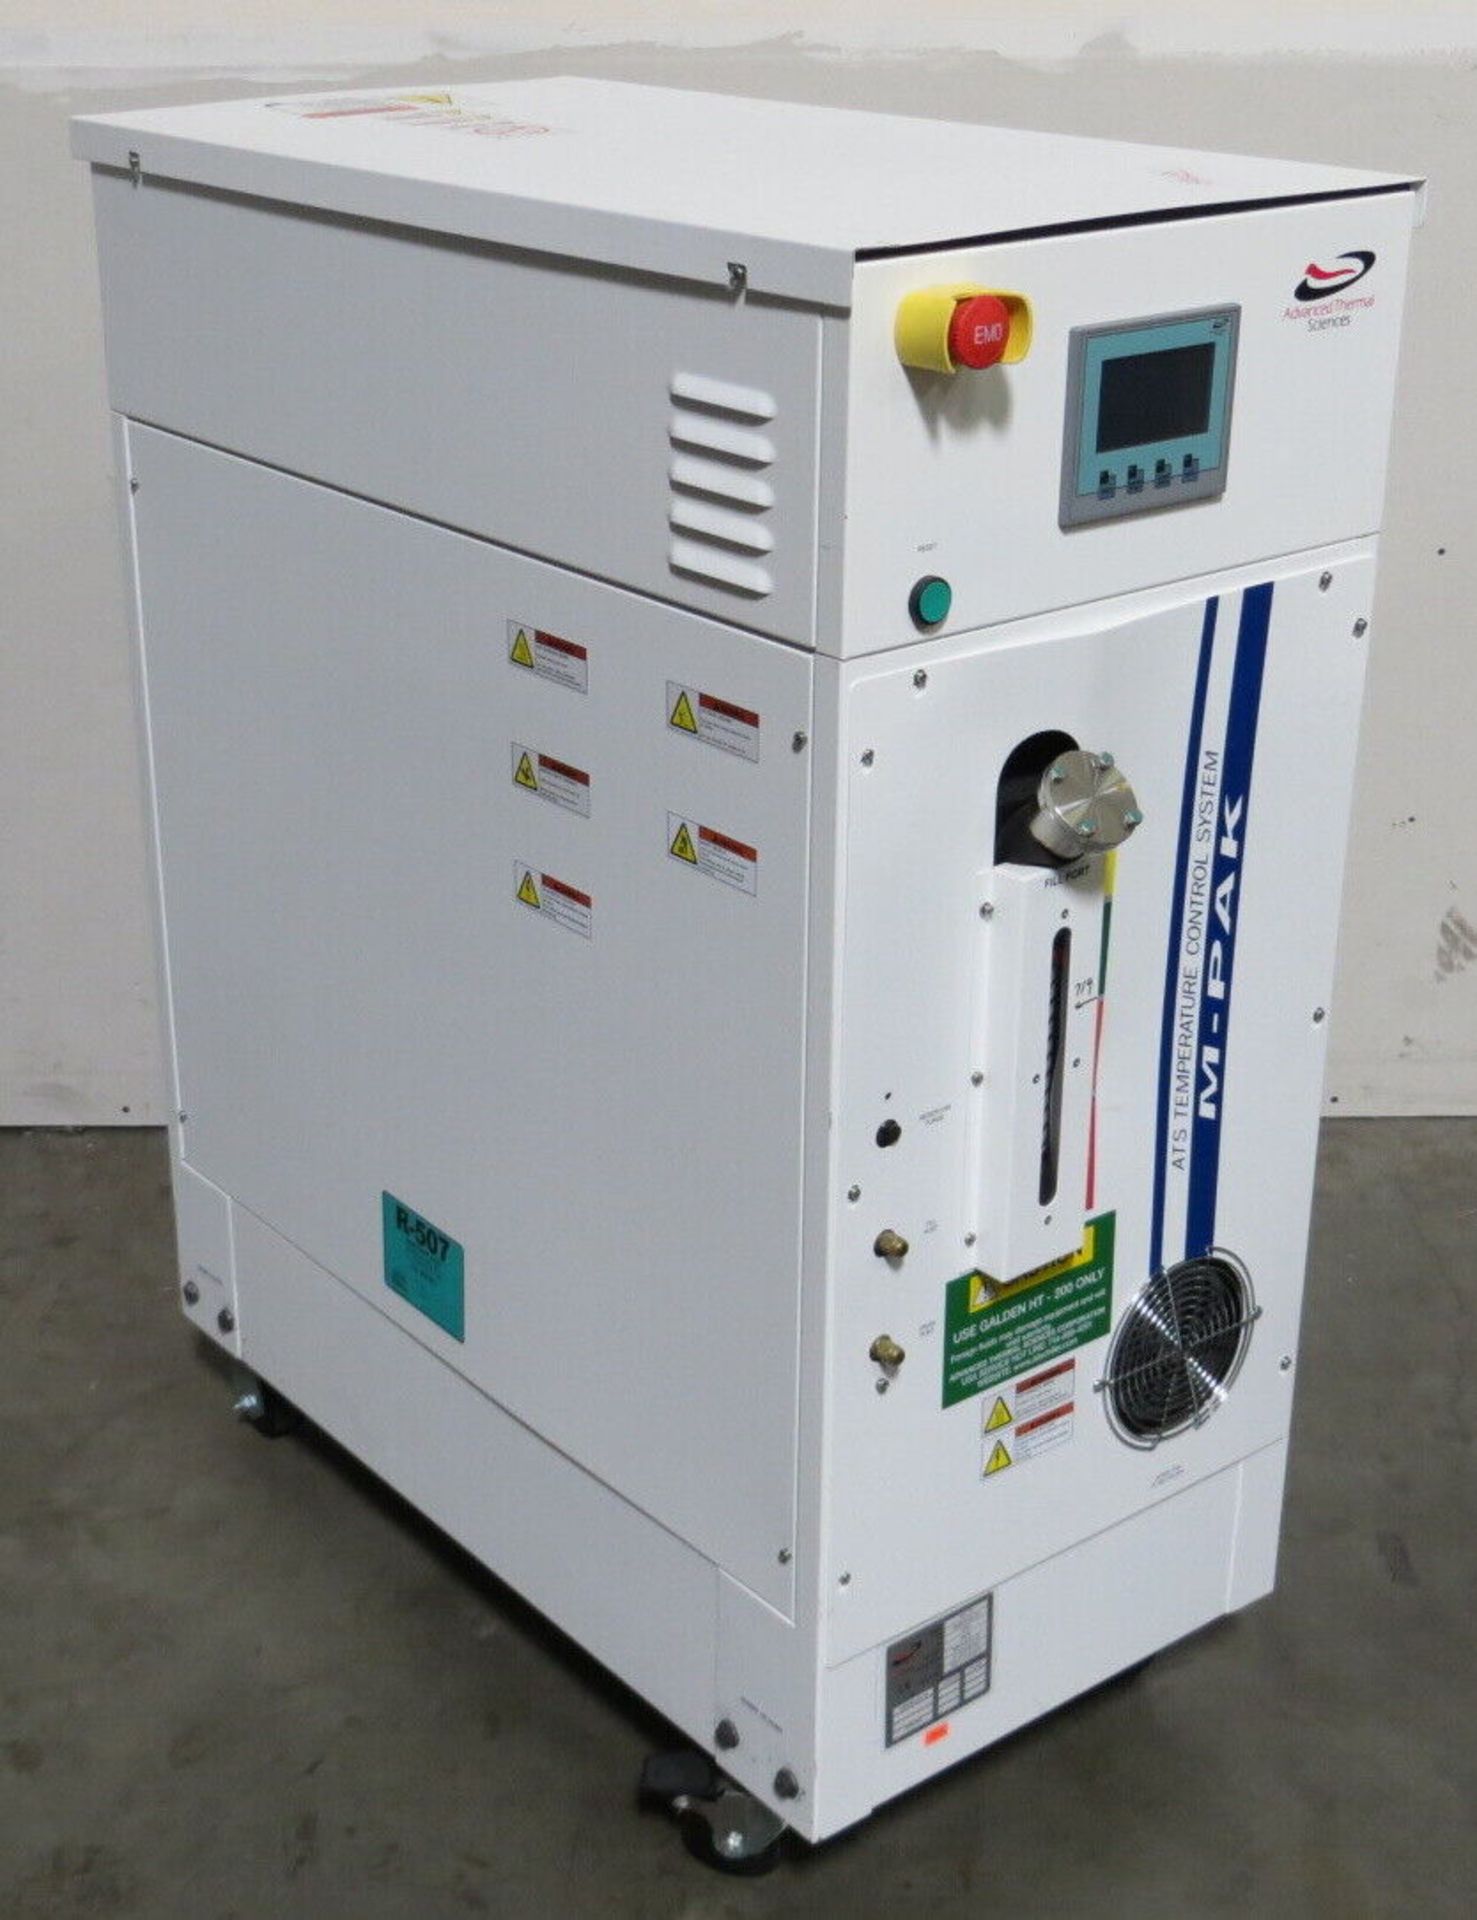 Advanced Thermal Sciences M-Pak MP-17B Chiller 4090093-001 R2 - Gilroy - Image 3 of 10